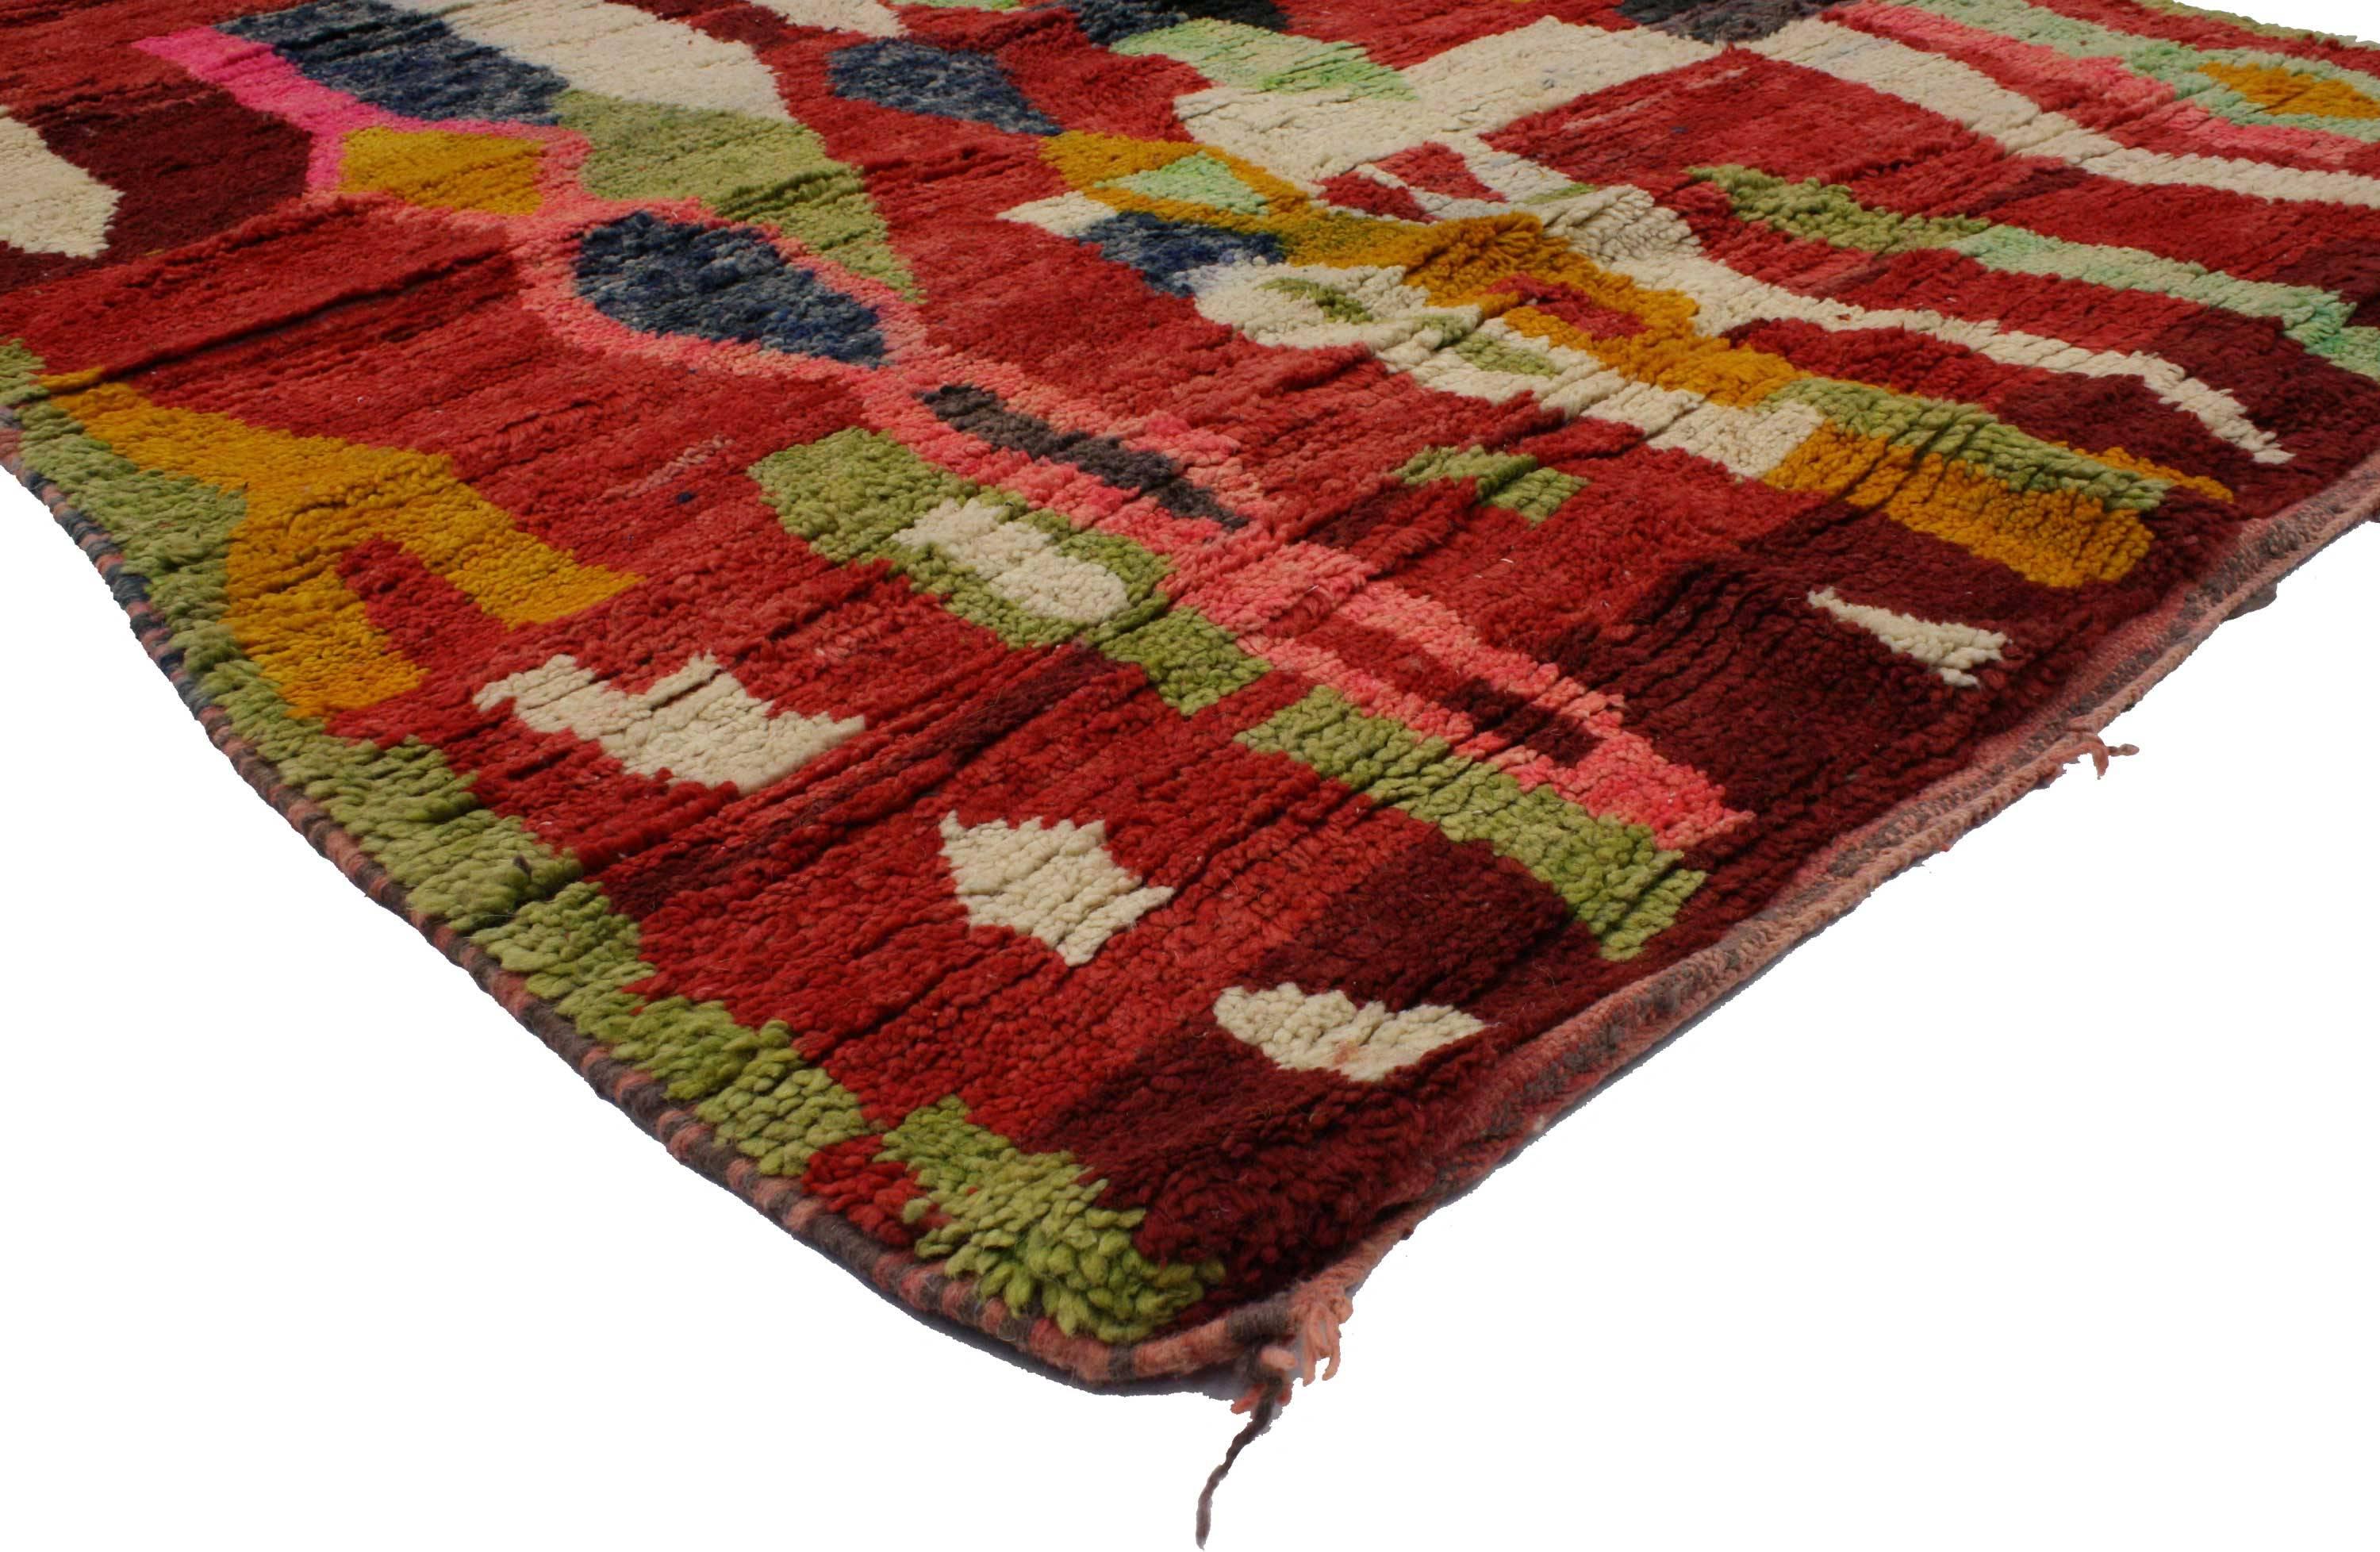 20310 Contemporary Berber Colorful Moroccan Rehamna Rug with Postmodern Bauhaus Style. Impeccably woven from hand-knotted wool and free-form designs, this contemporary Moroccan rug features a postmodern Bauhaus Style. Showcasing a kaleidoscope of